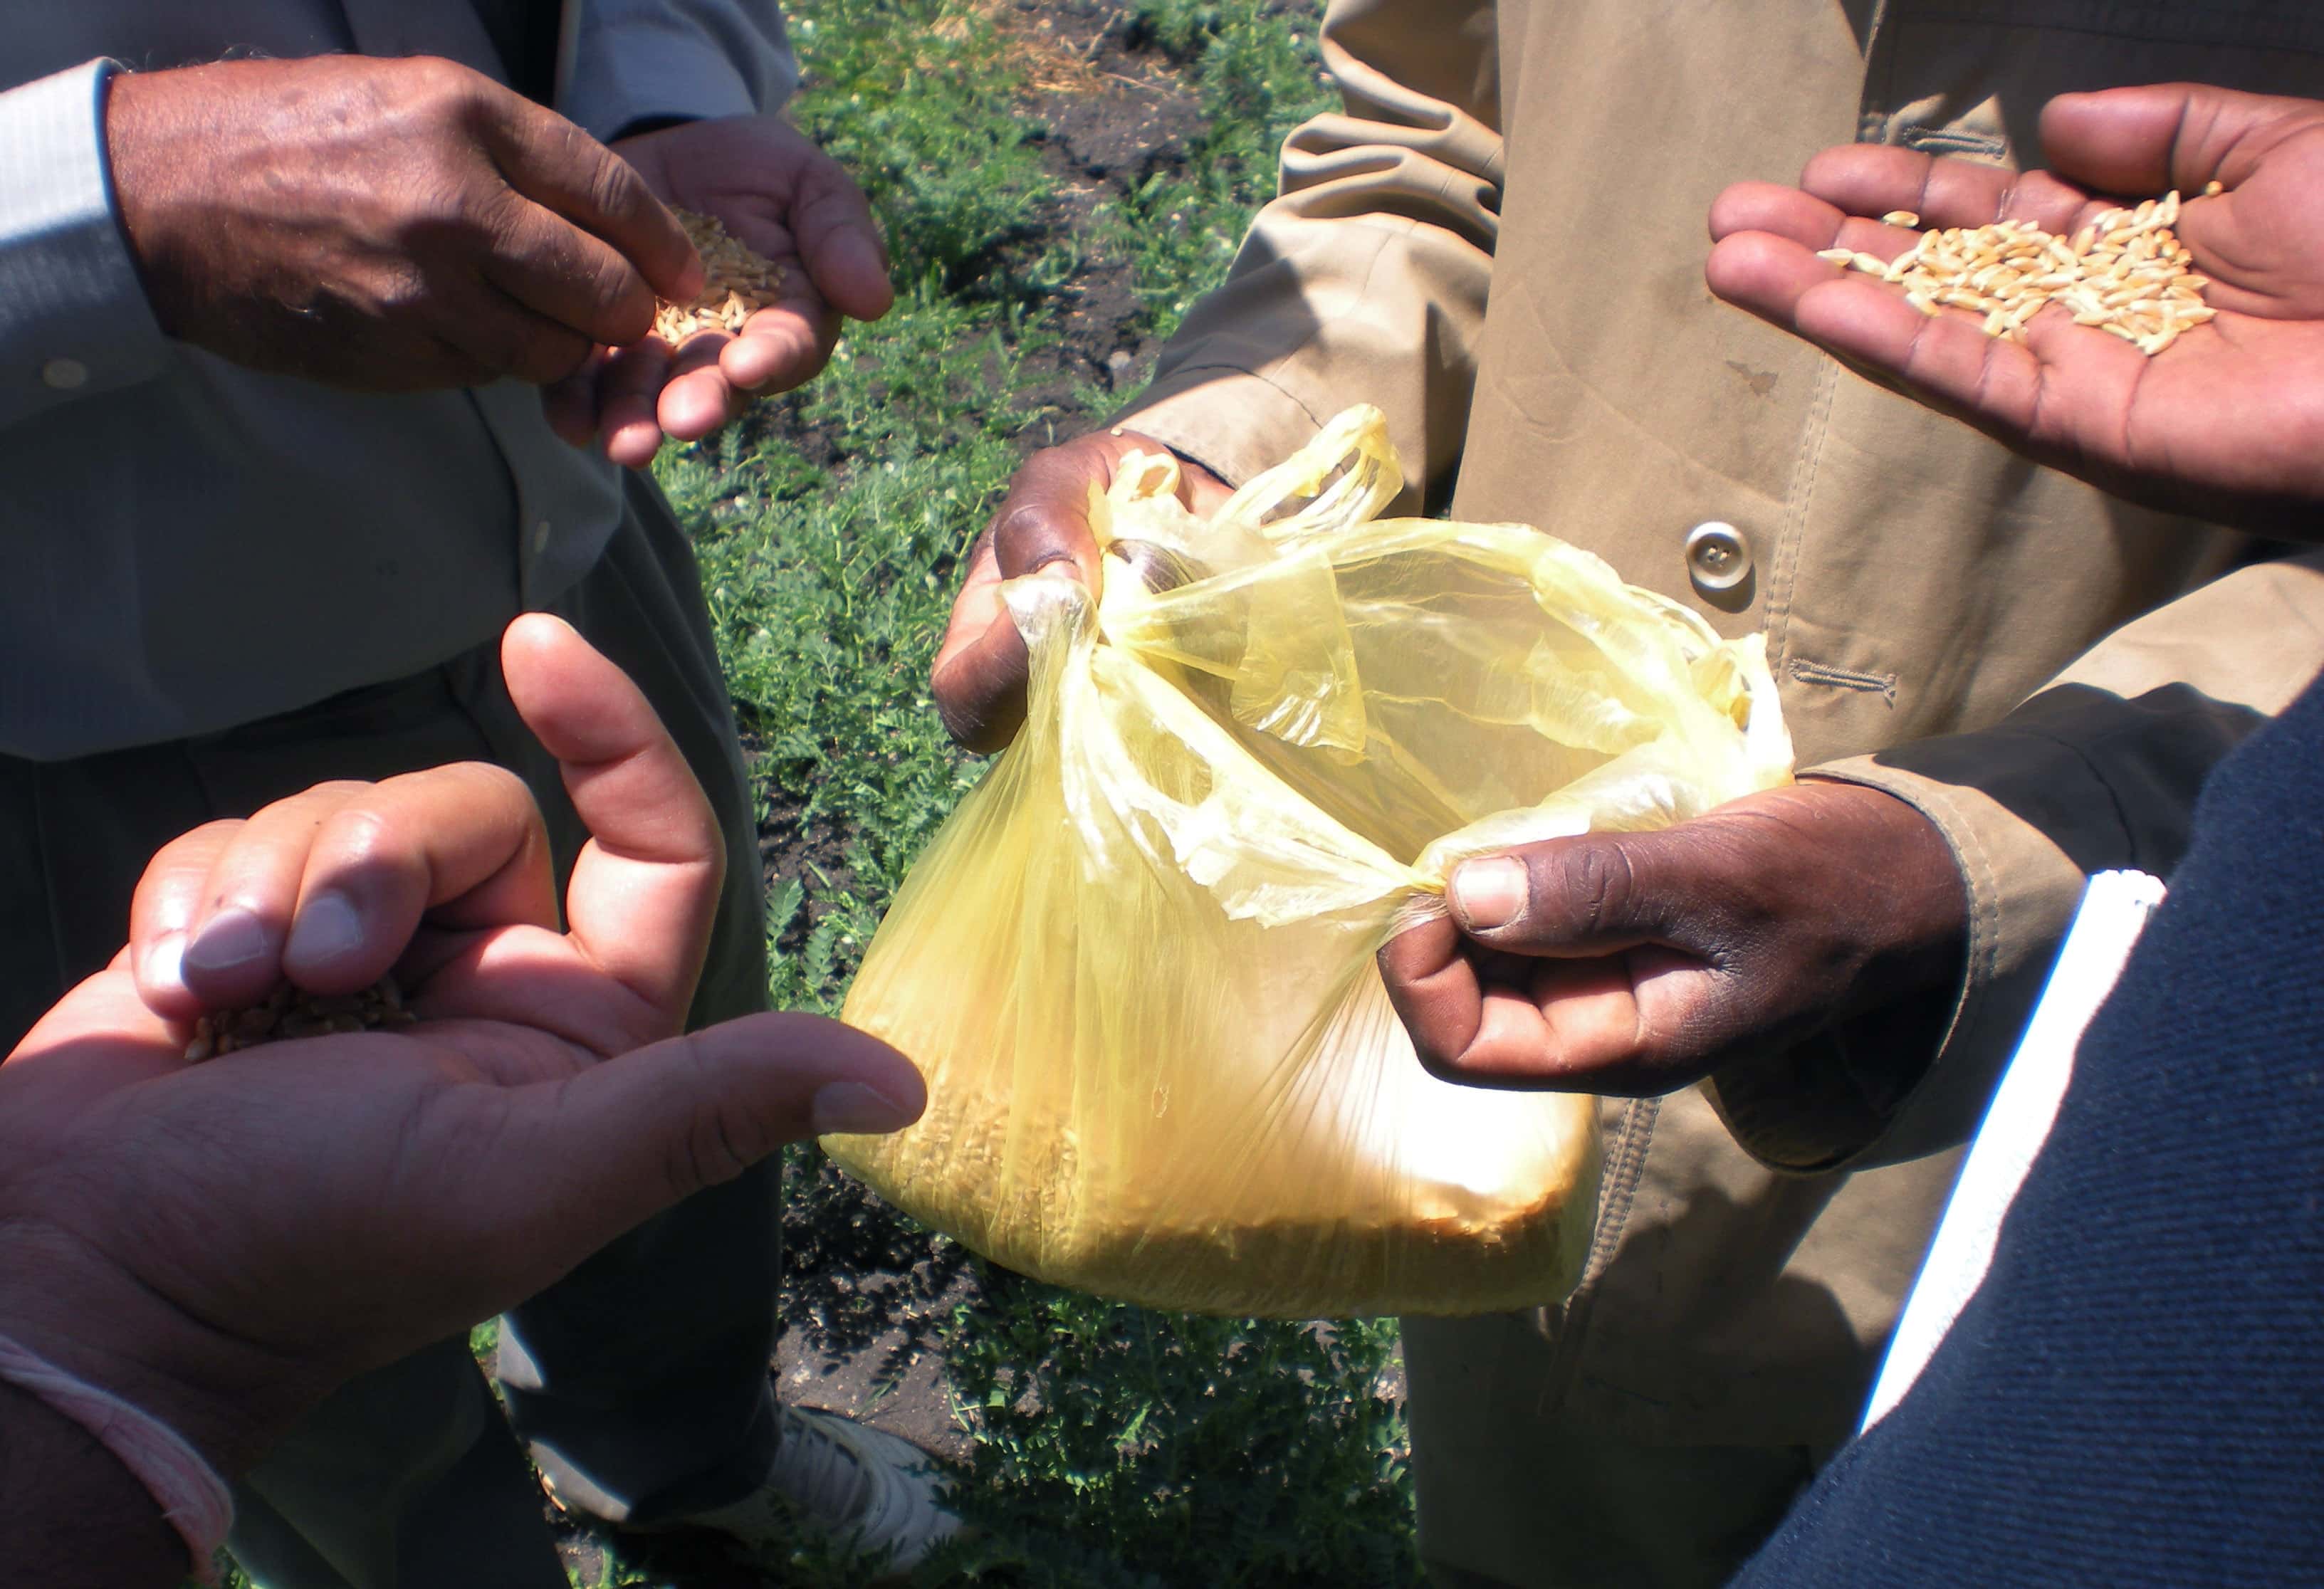 This photo taken on 10 October 2012 shows participants of a field trip in the Wheat for Food Security in Africa conference examining wheat in a plastic bag in Debre Zeit, Ethiopia., AP Photo/Kirubel Tadesse Ayetenfisu